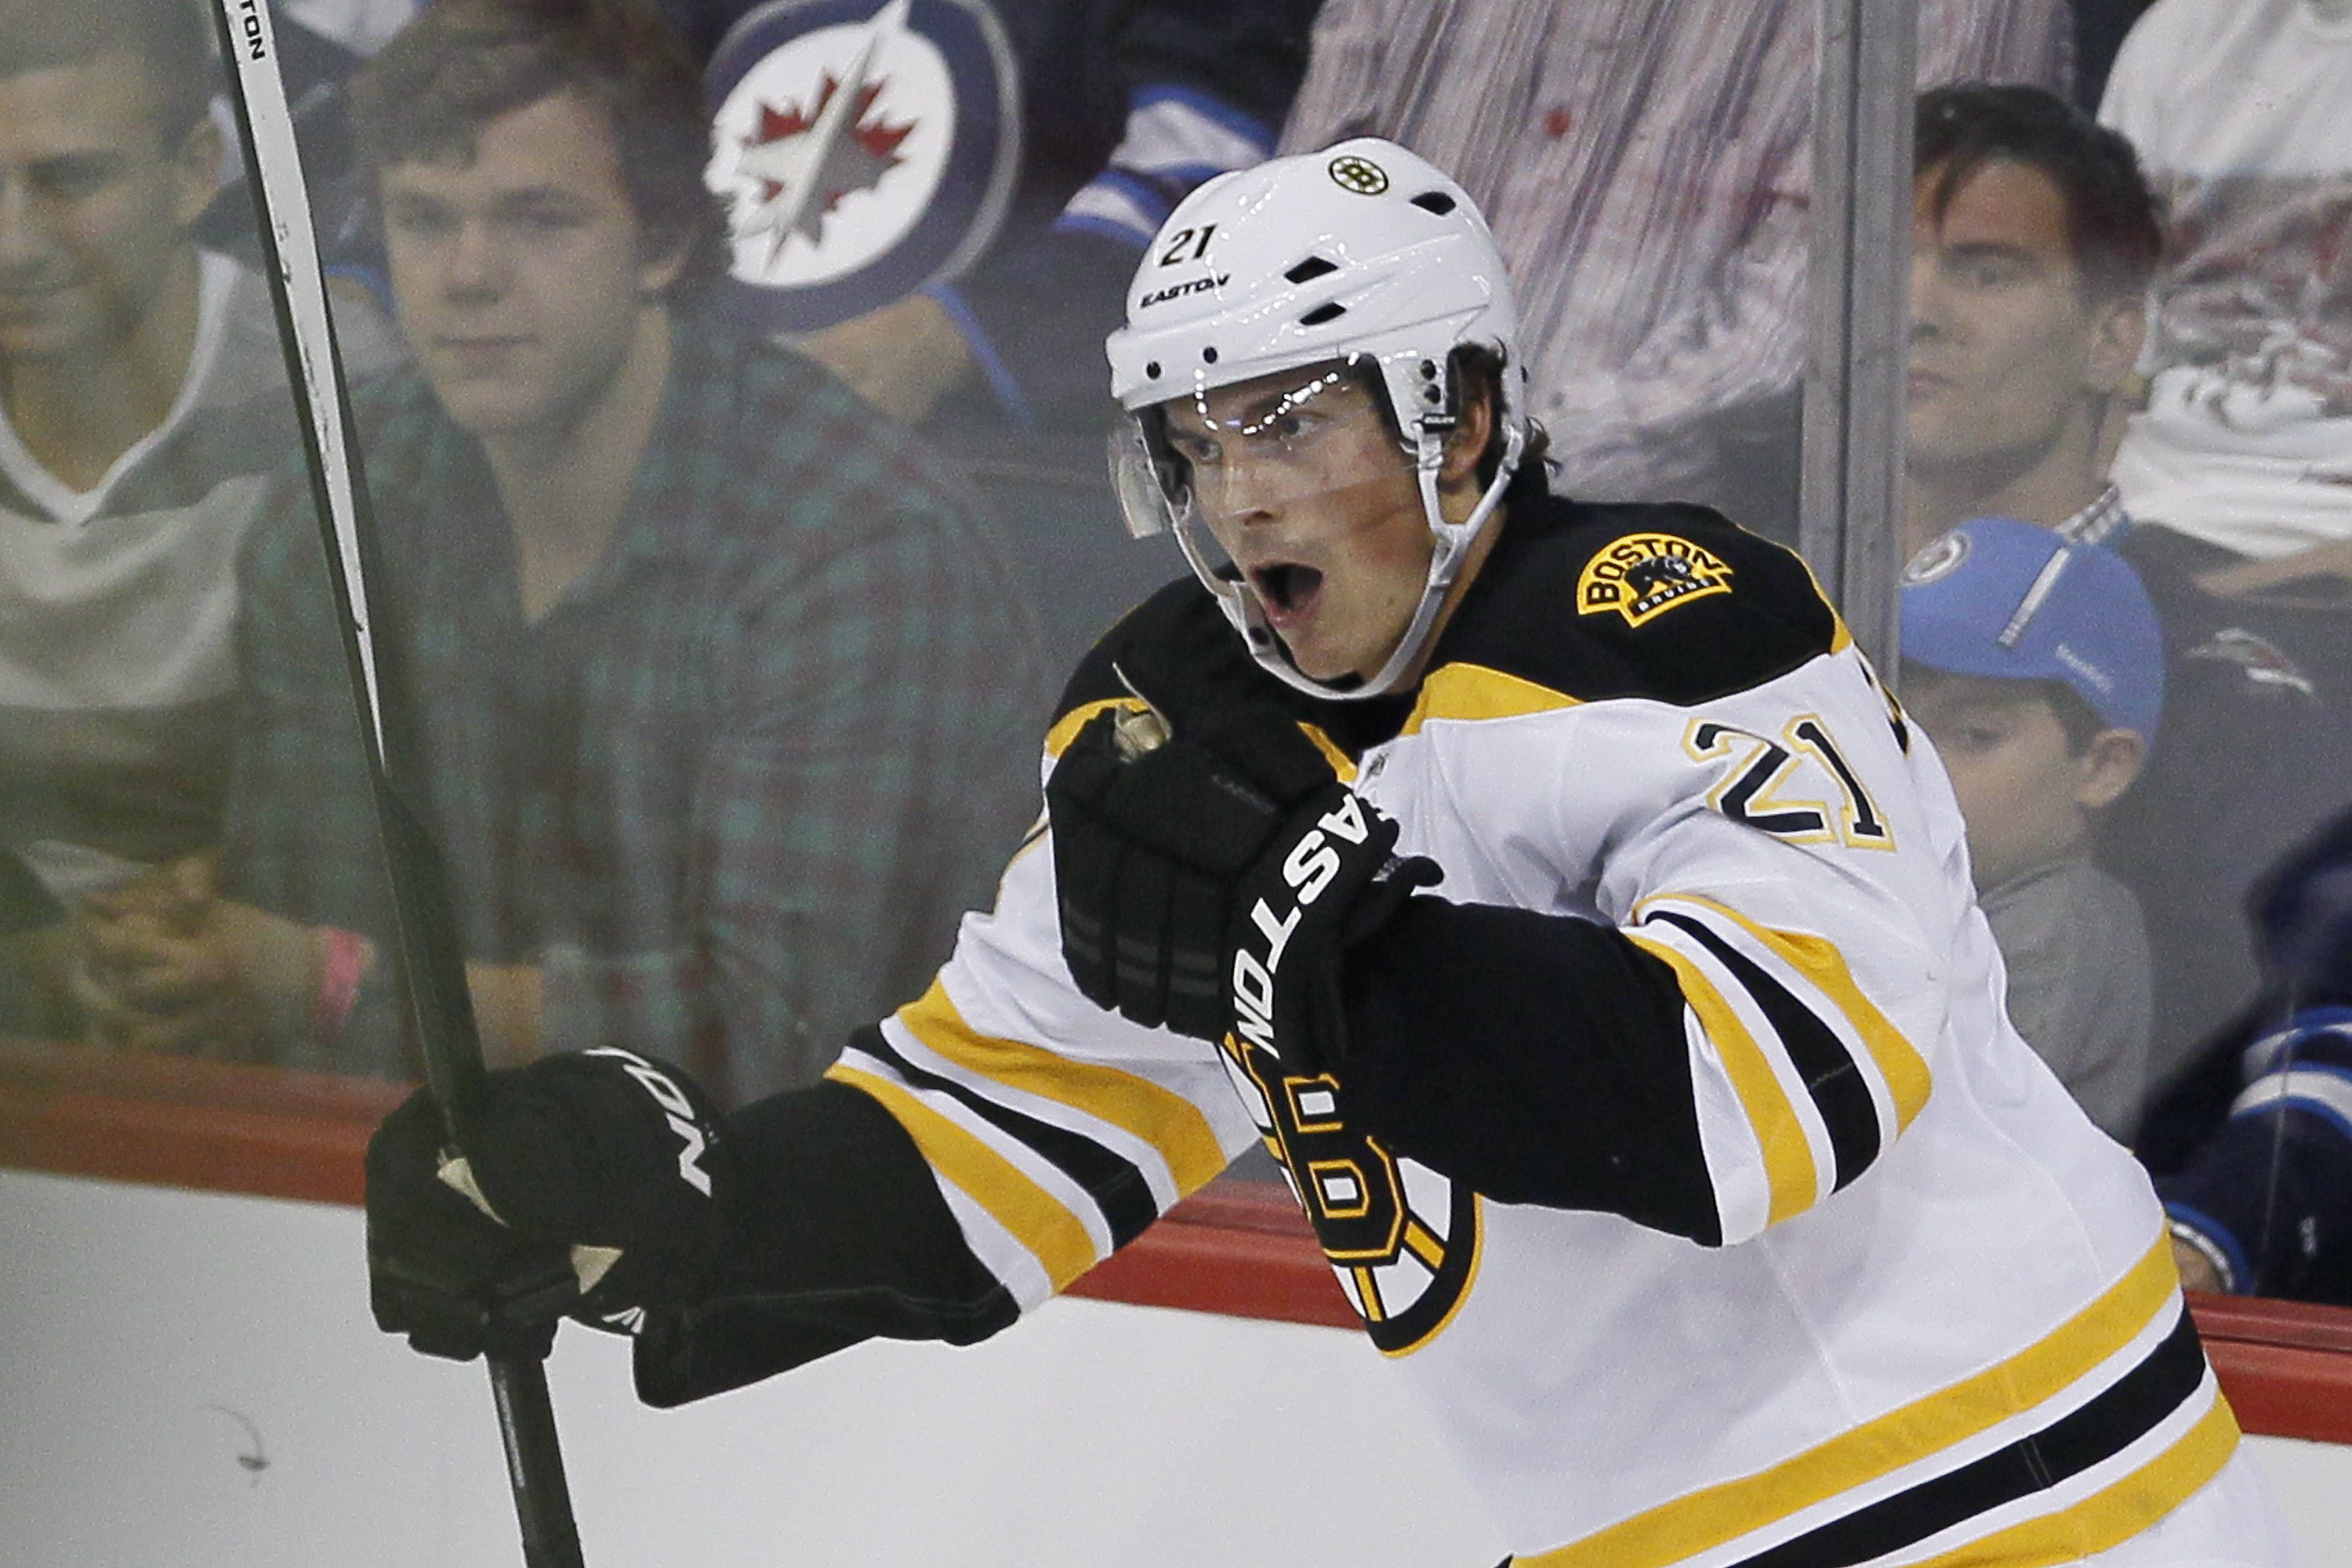 Loui Eriksson was a premiere forward for the Bruins, and is now